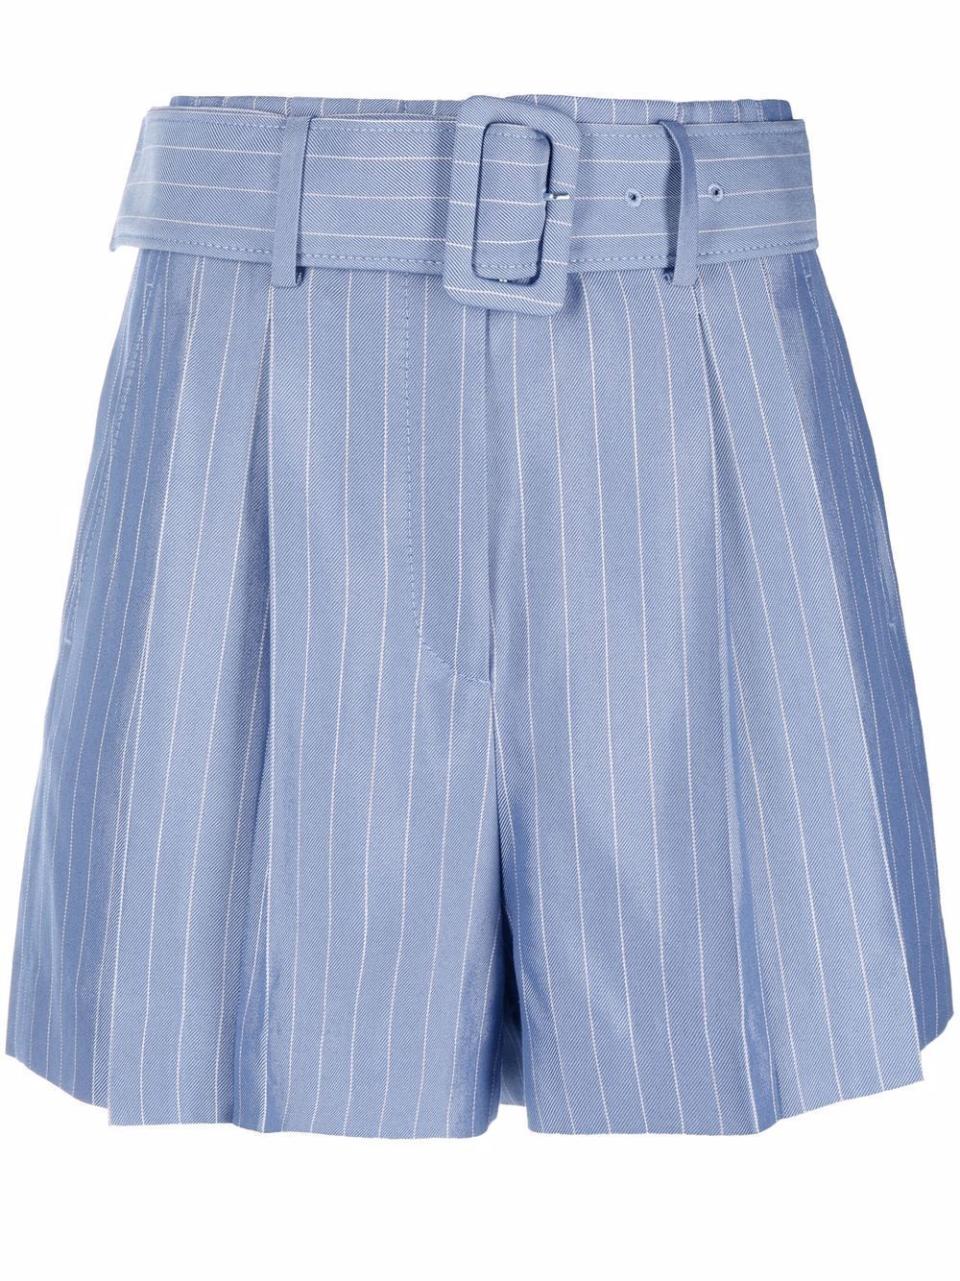 2) Pinstripe Tailored Belted Shorts